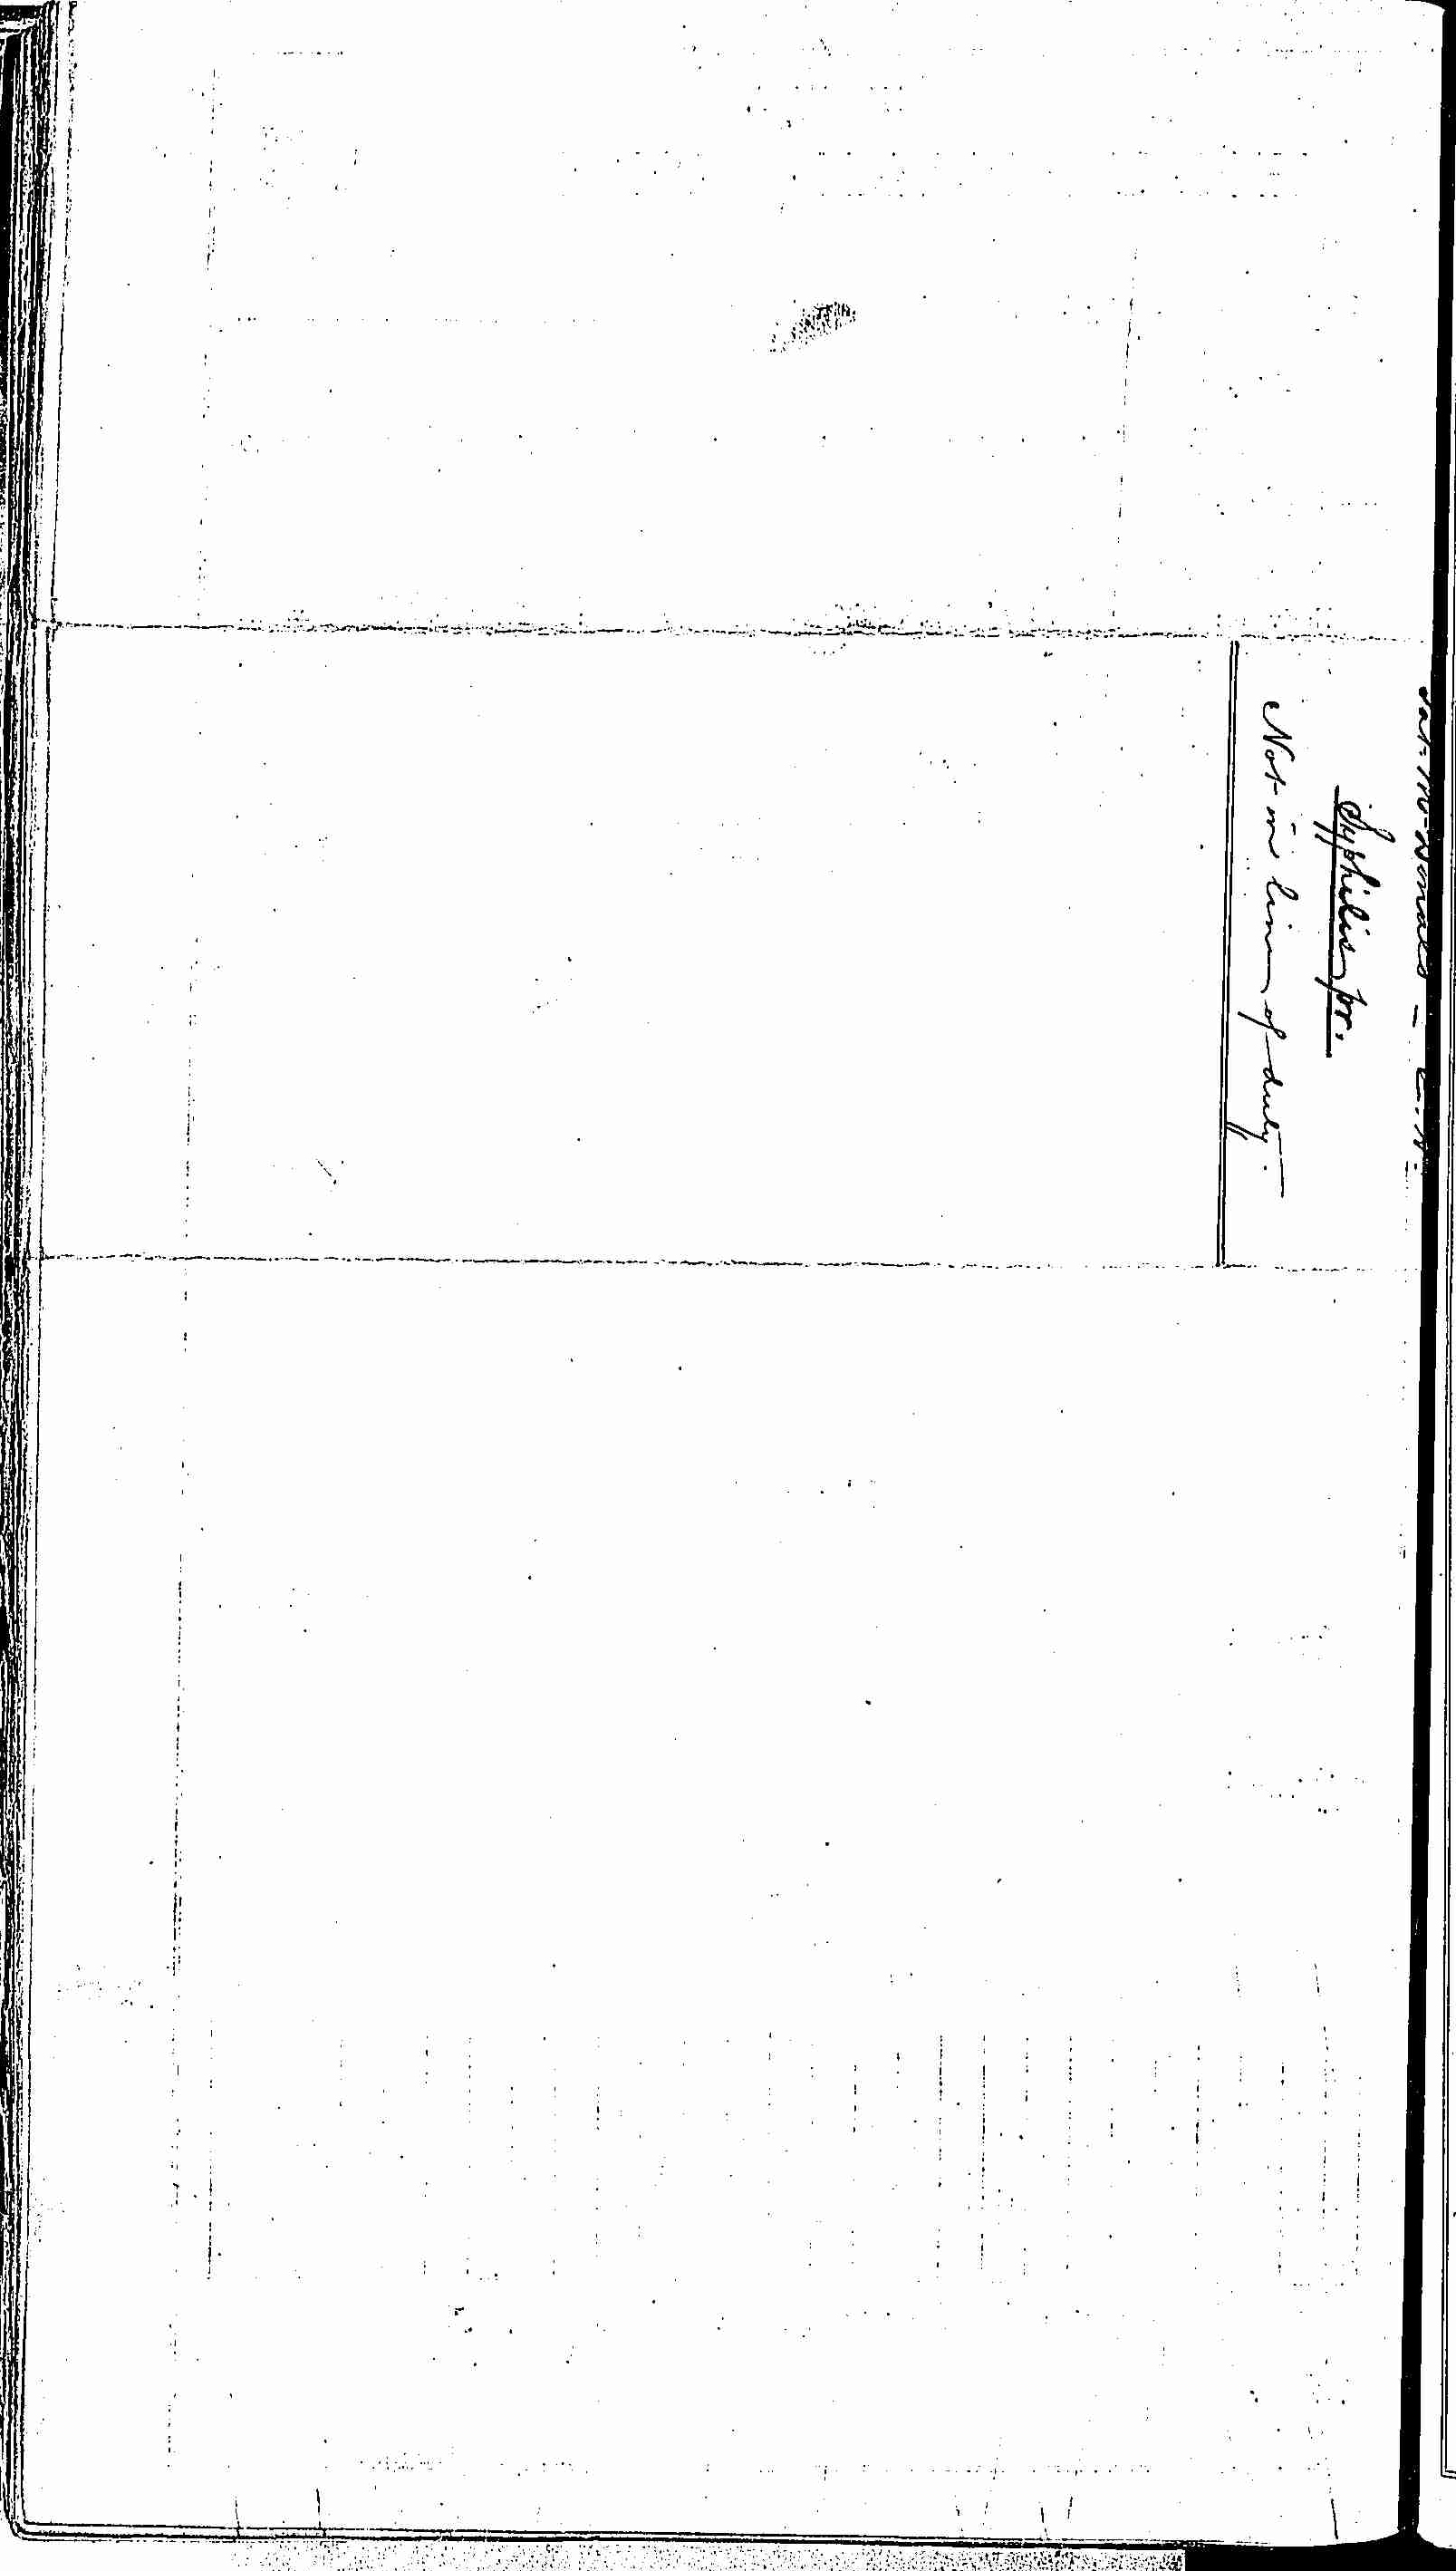 Entry for Patrick McDonald (page 2 of 2) in the log Hospital Tickets and Case Papers - Naval Hospital - Washington, D.C. - 1866-68